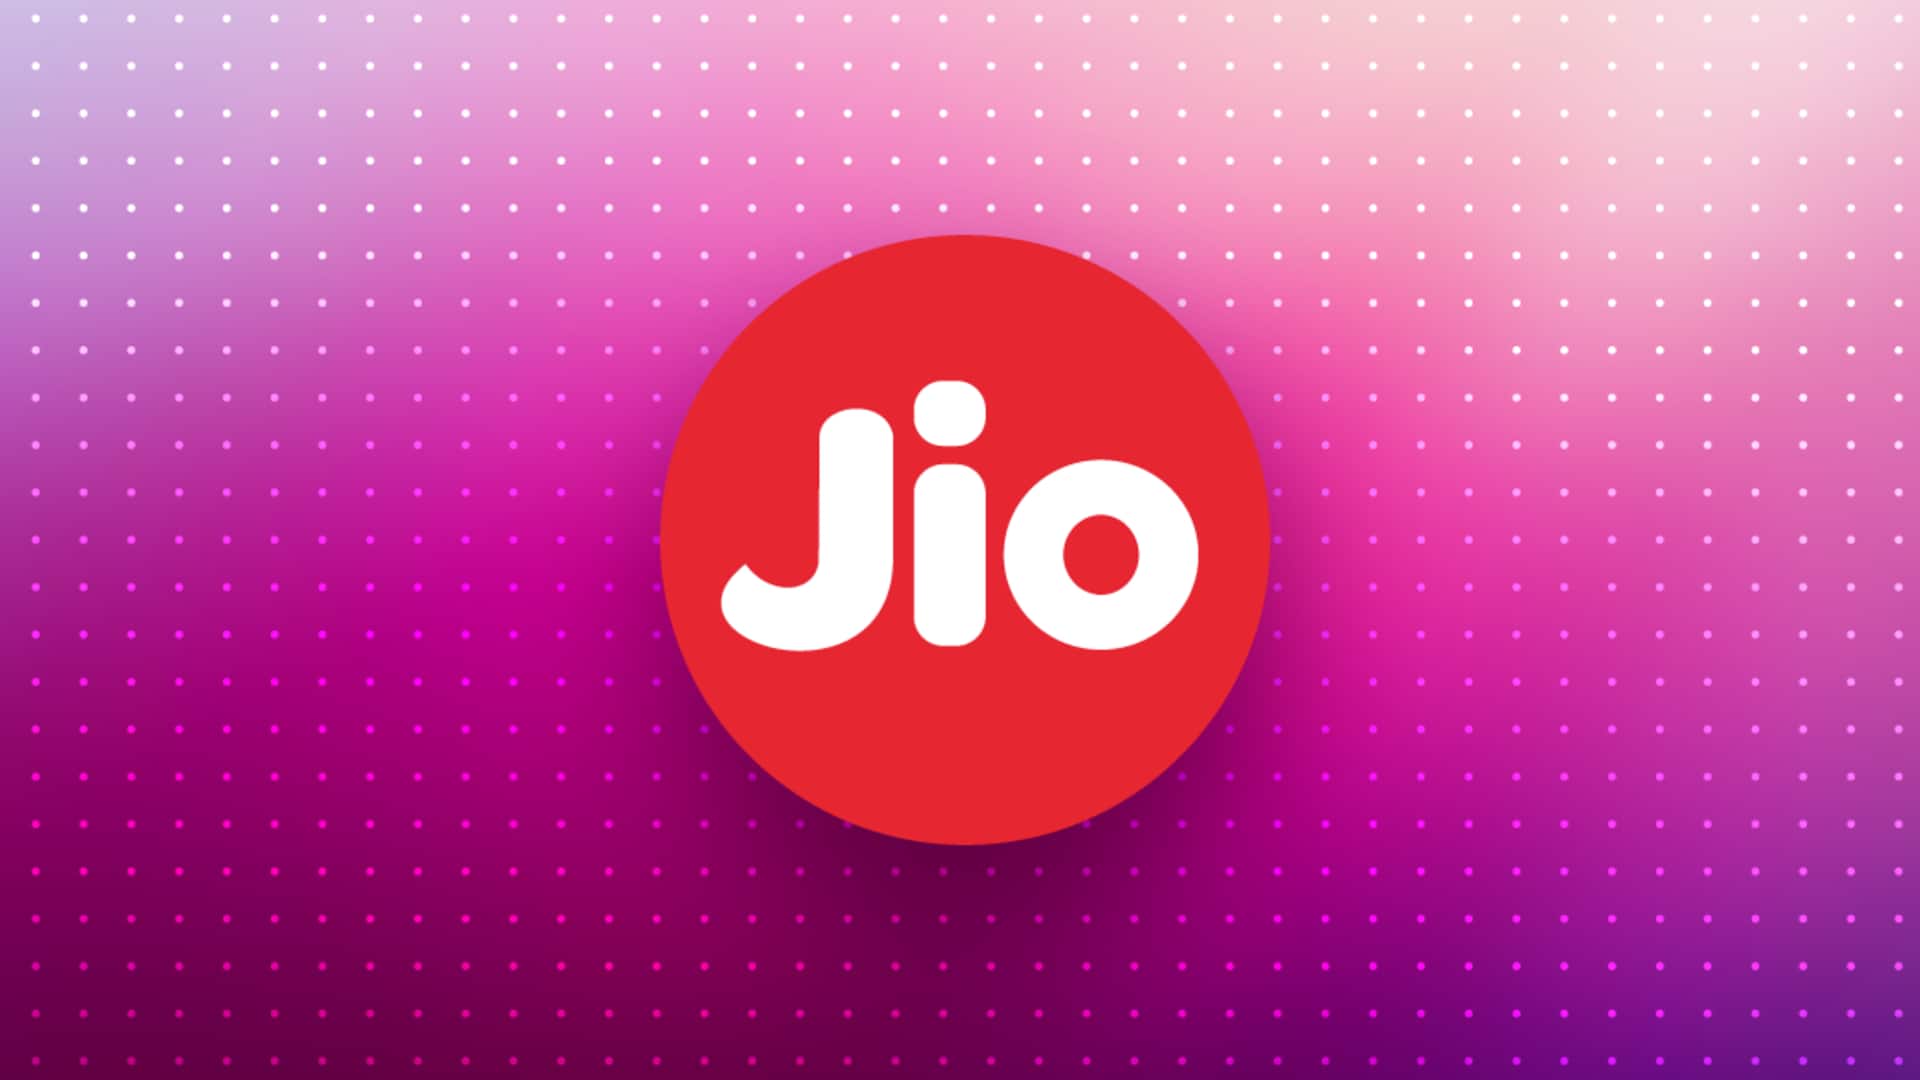 Reliance Jio Vs Airtel Vs Vi: Which Is Offering More Benefits With Premium  Prepaid Plans? - Gizbot News